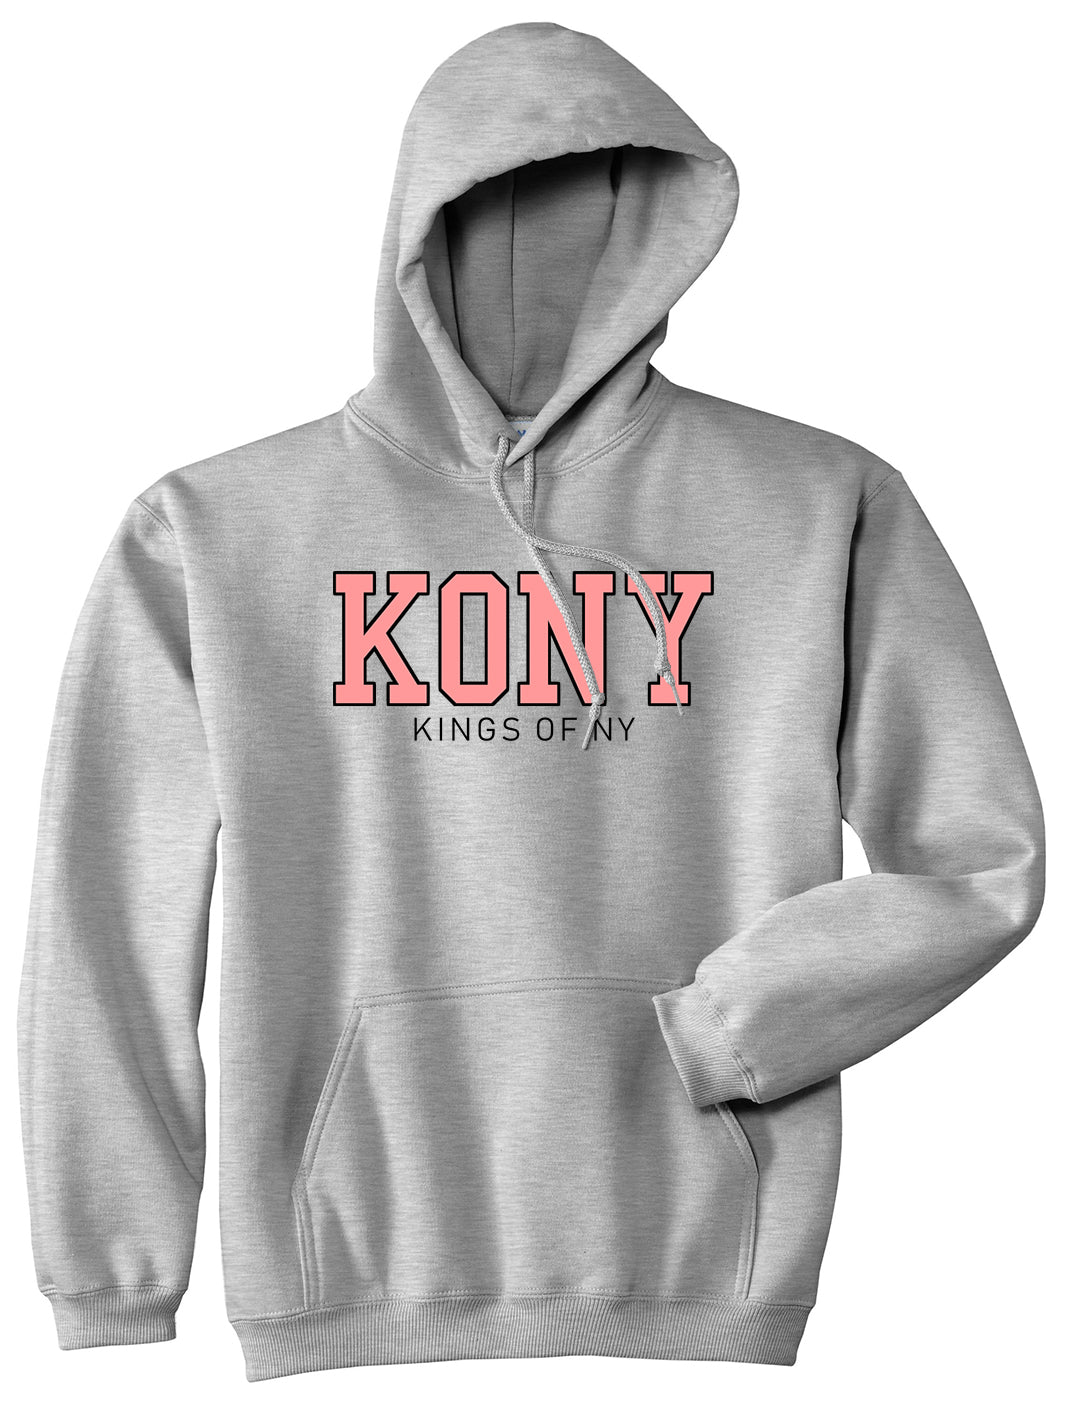 KONY College Mens Pullover Hoodie Grey by Kings Of NY